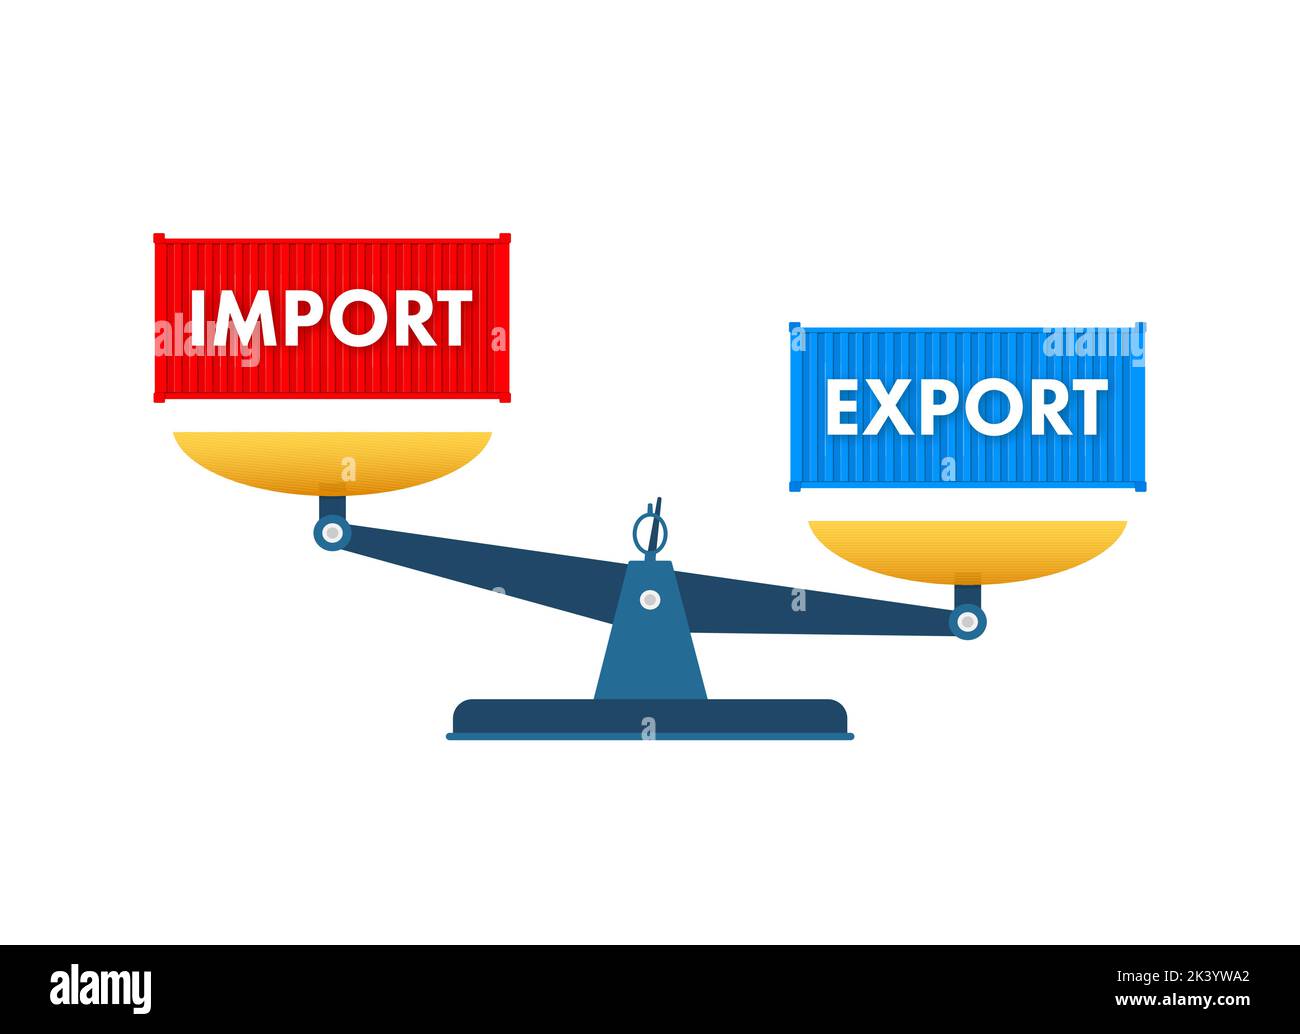 Port crane lift two red cargo containers with import and export words. Vector stock illustration. Stock Vector